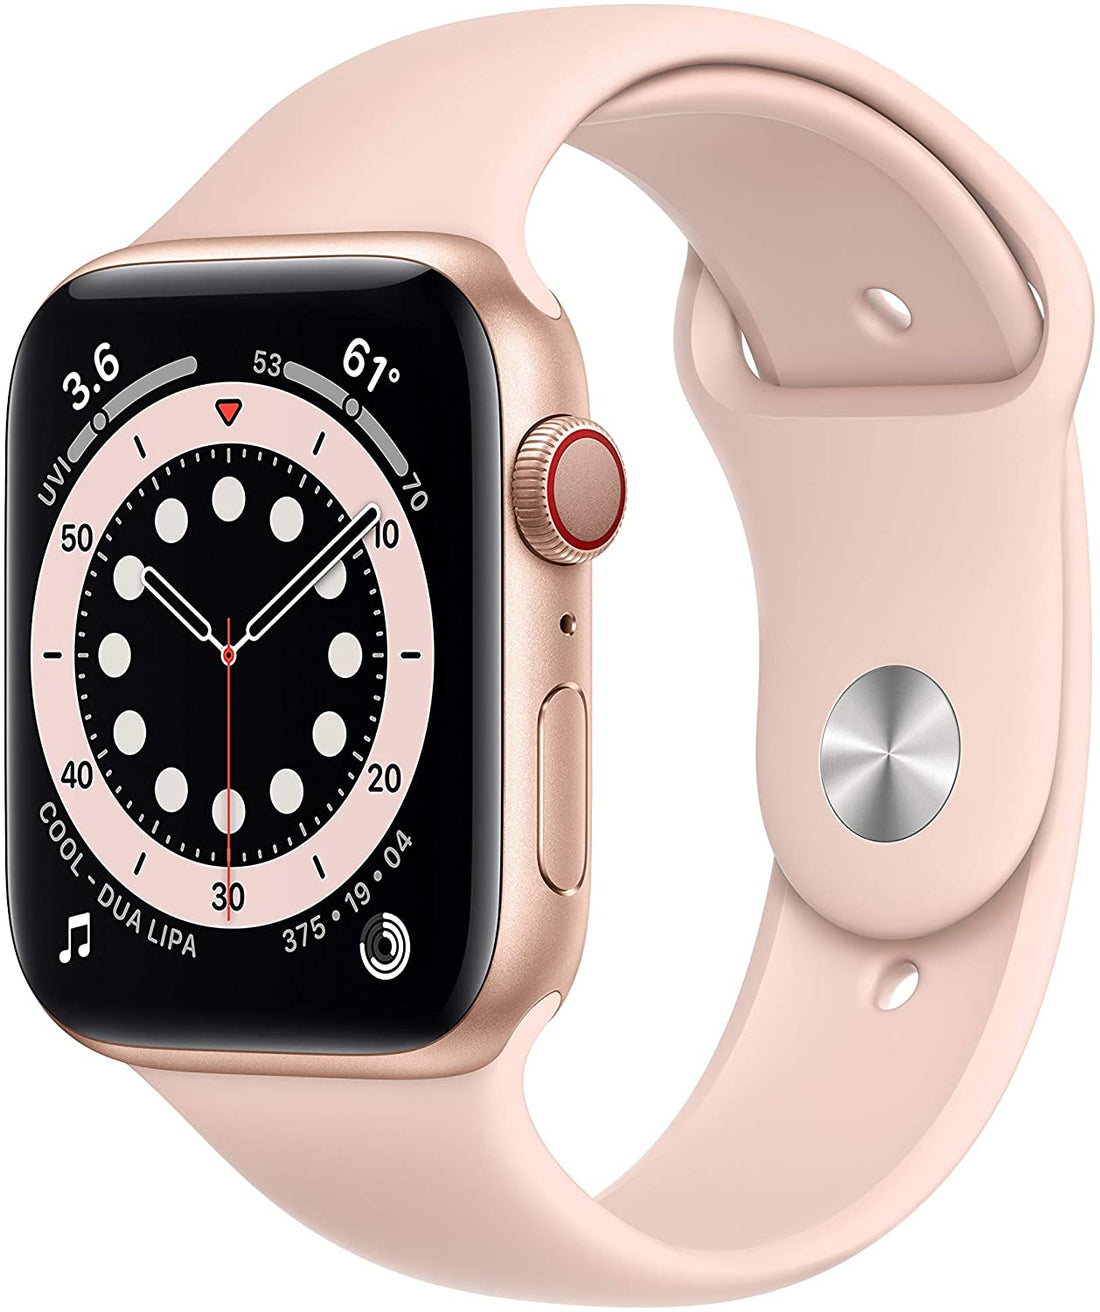 Apple Watch Series 6 (GPS + LTE) 44mm Gold Aluminum Case &amp; Pink Sand Sport Band (Certified Refurbished)